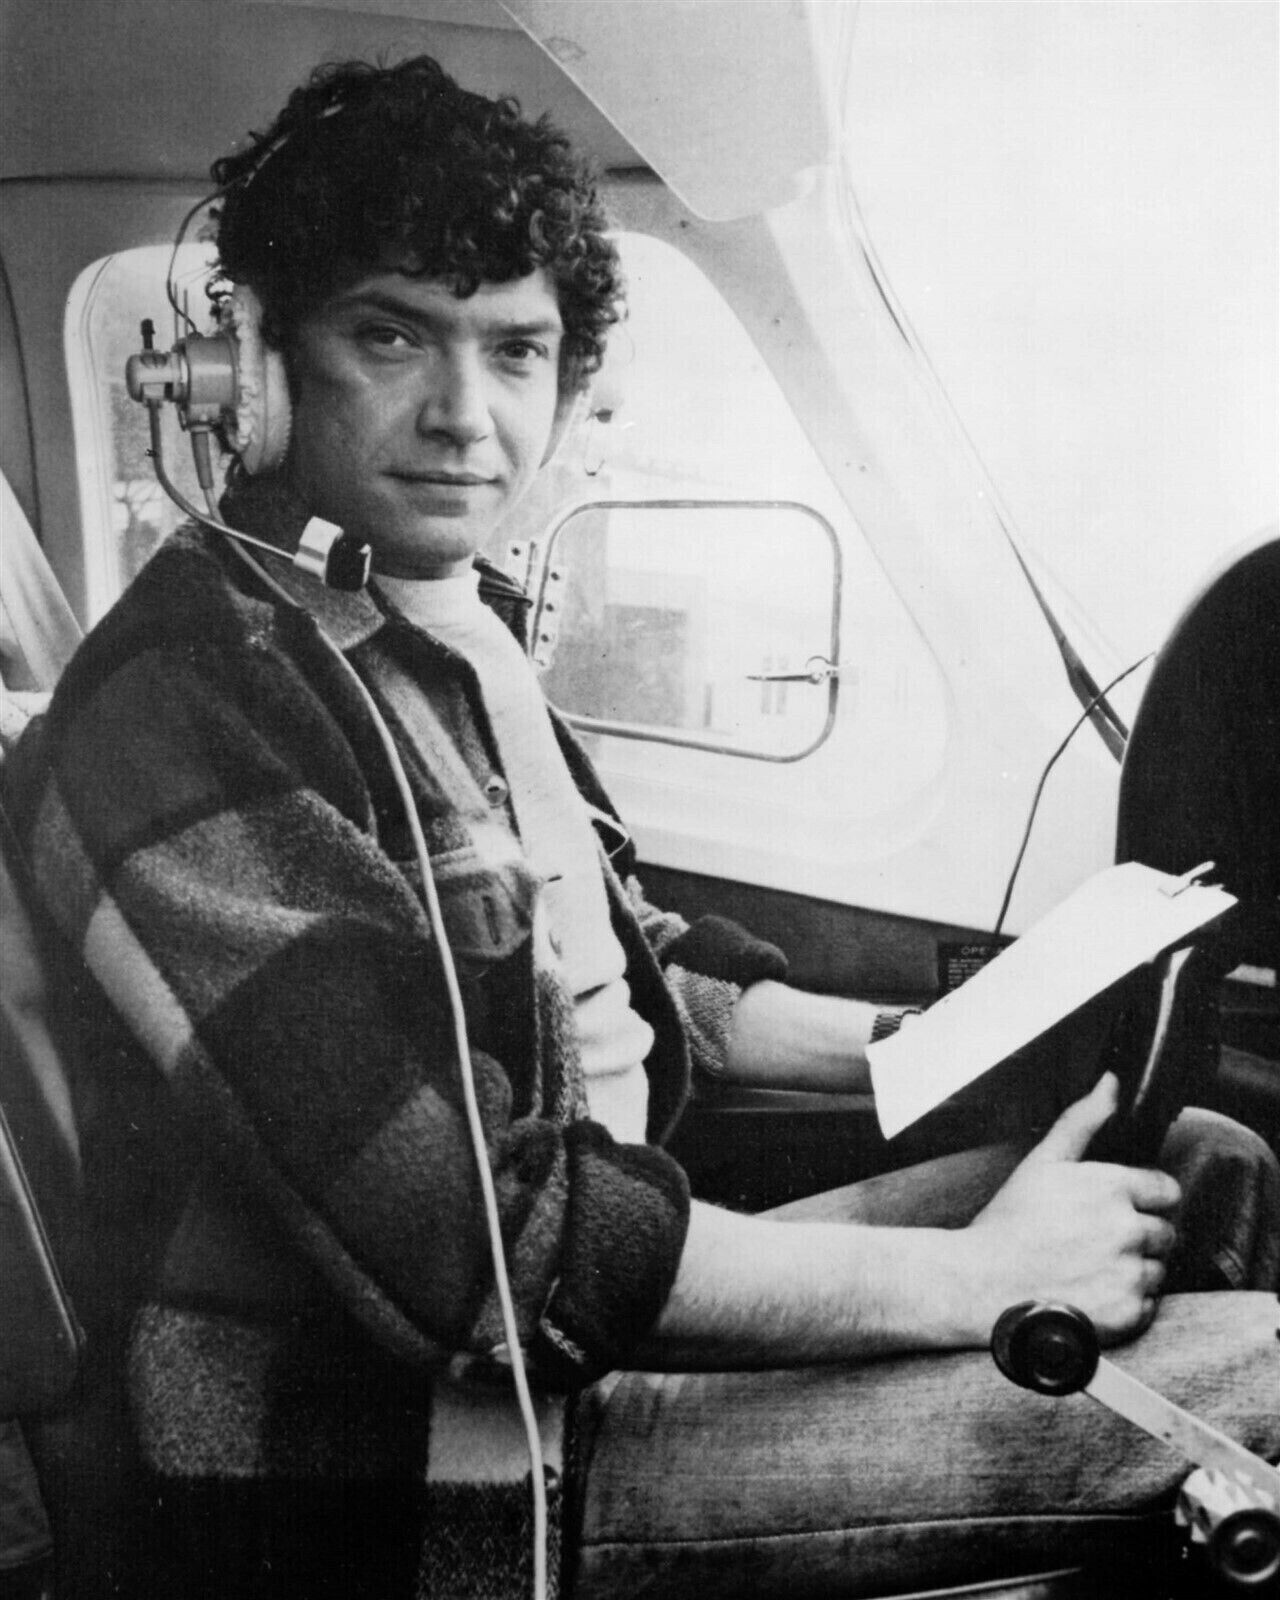 Martin Shaw at aircraft controls The Professionals TV series 5x7 inch photo